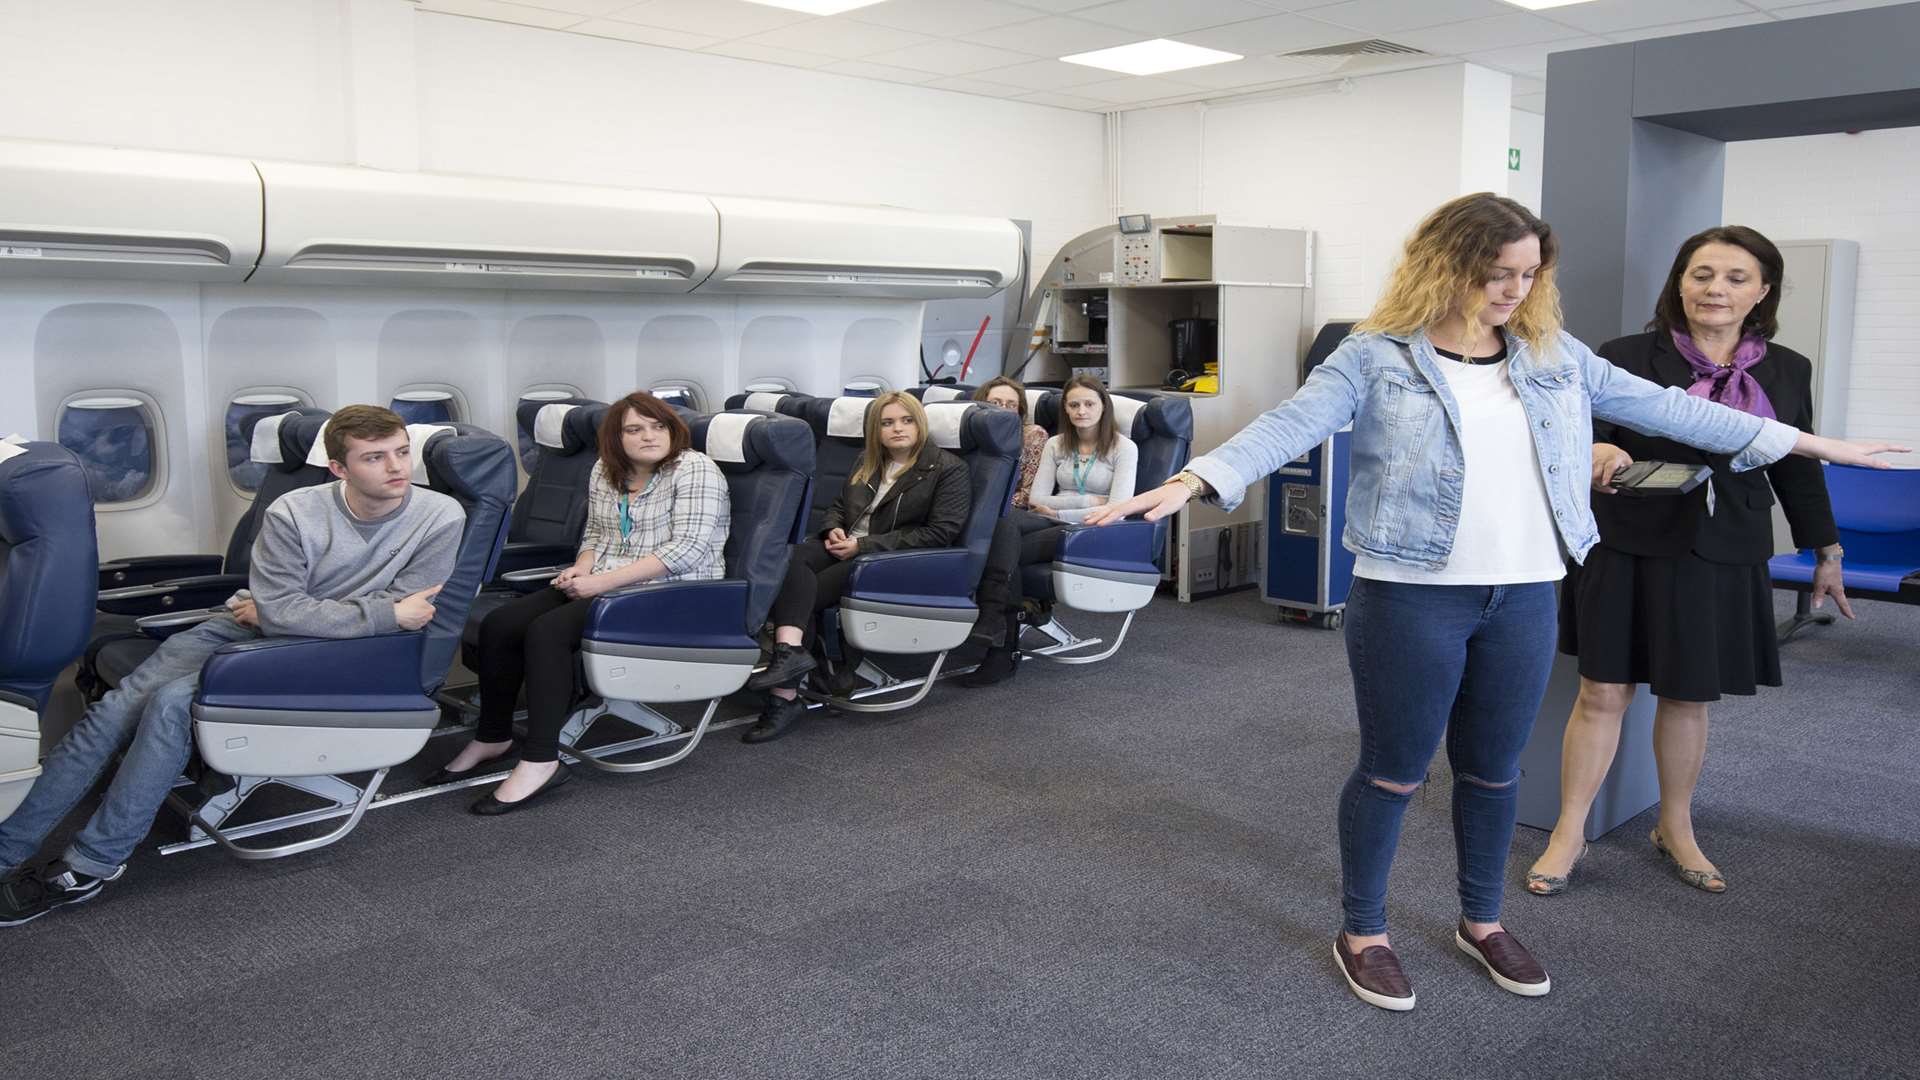 Students can improve their customer service skills in a mock air cabin built at East Kent College's Dover campus